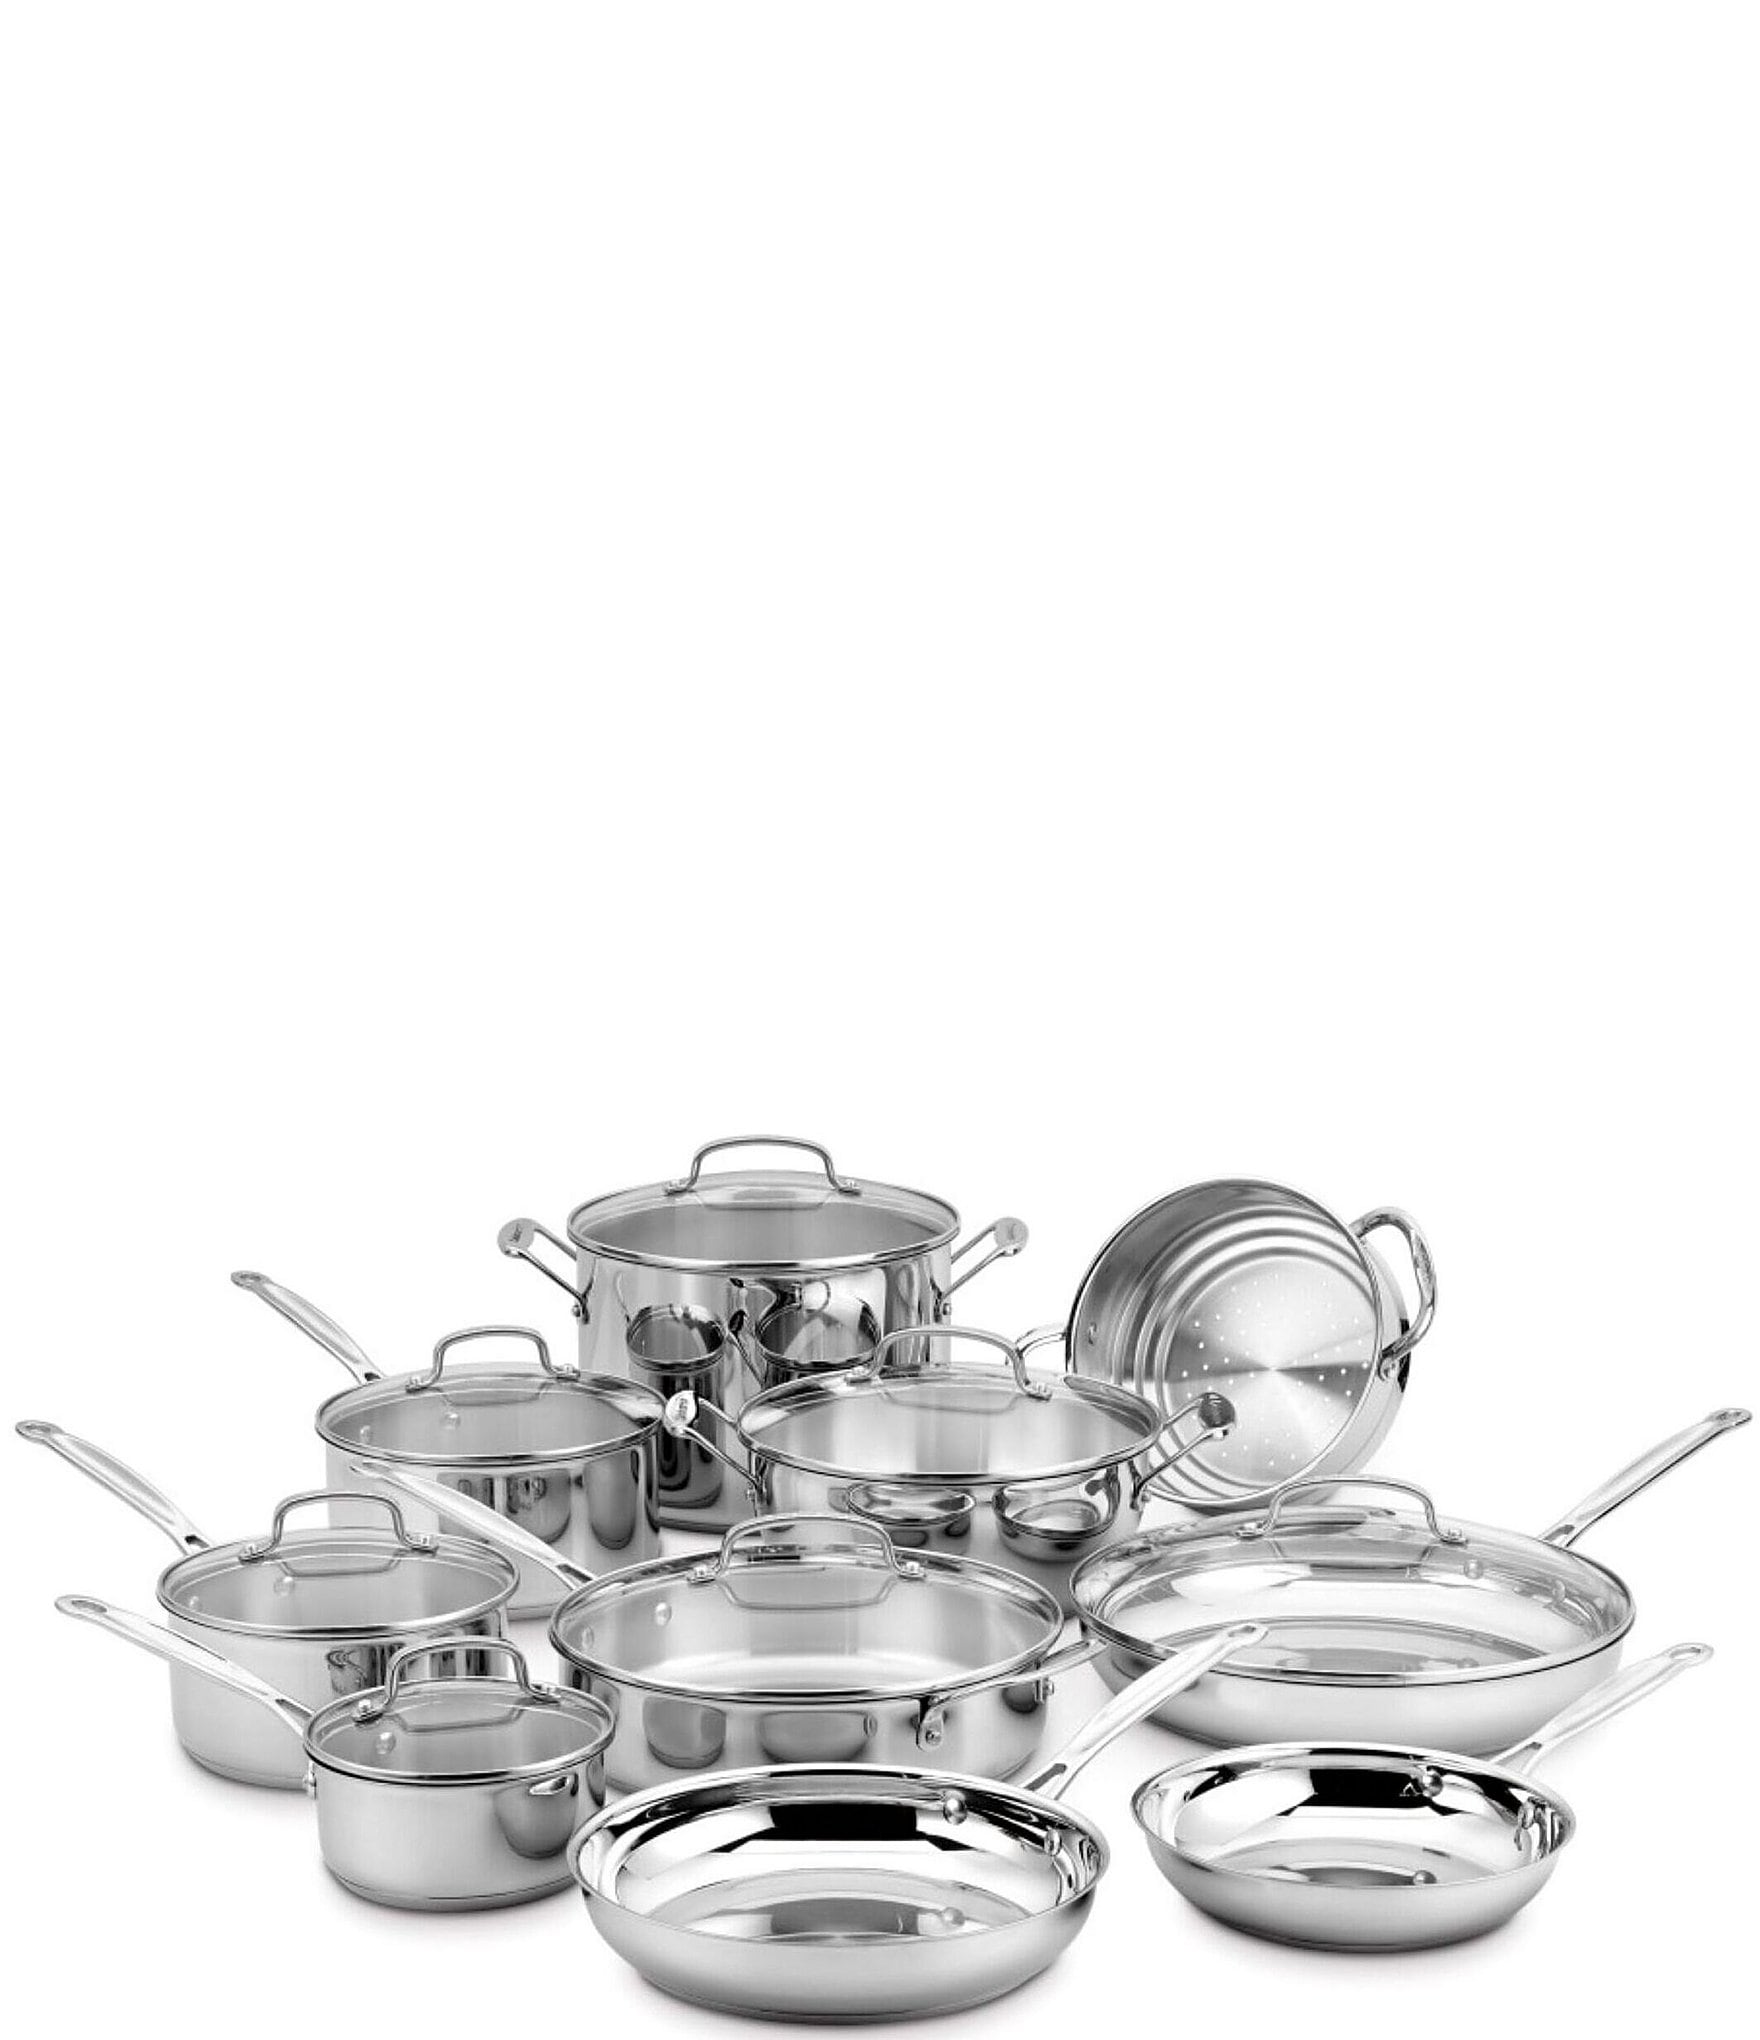 Cuisinart 77-17N 17-Piece Chef's Classic Stainless Steel Cookware